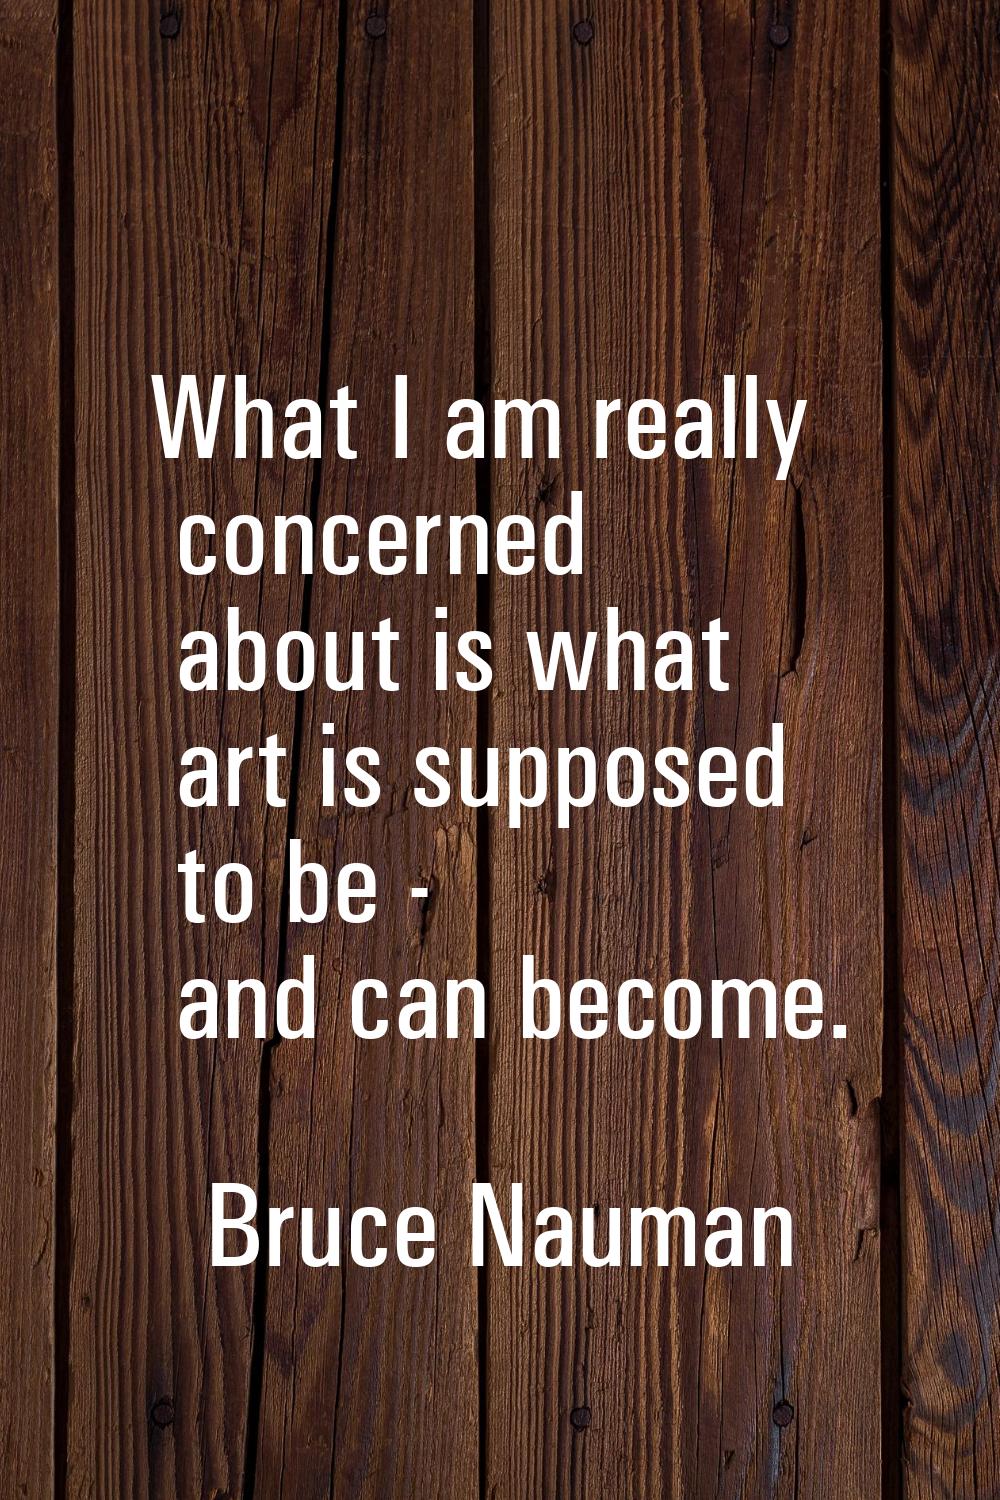 What I am really concerned about is what art is supposed to be - and can become.